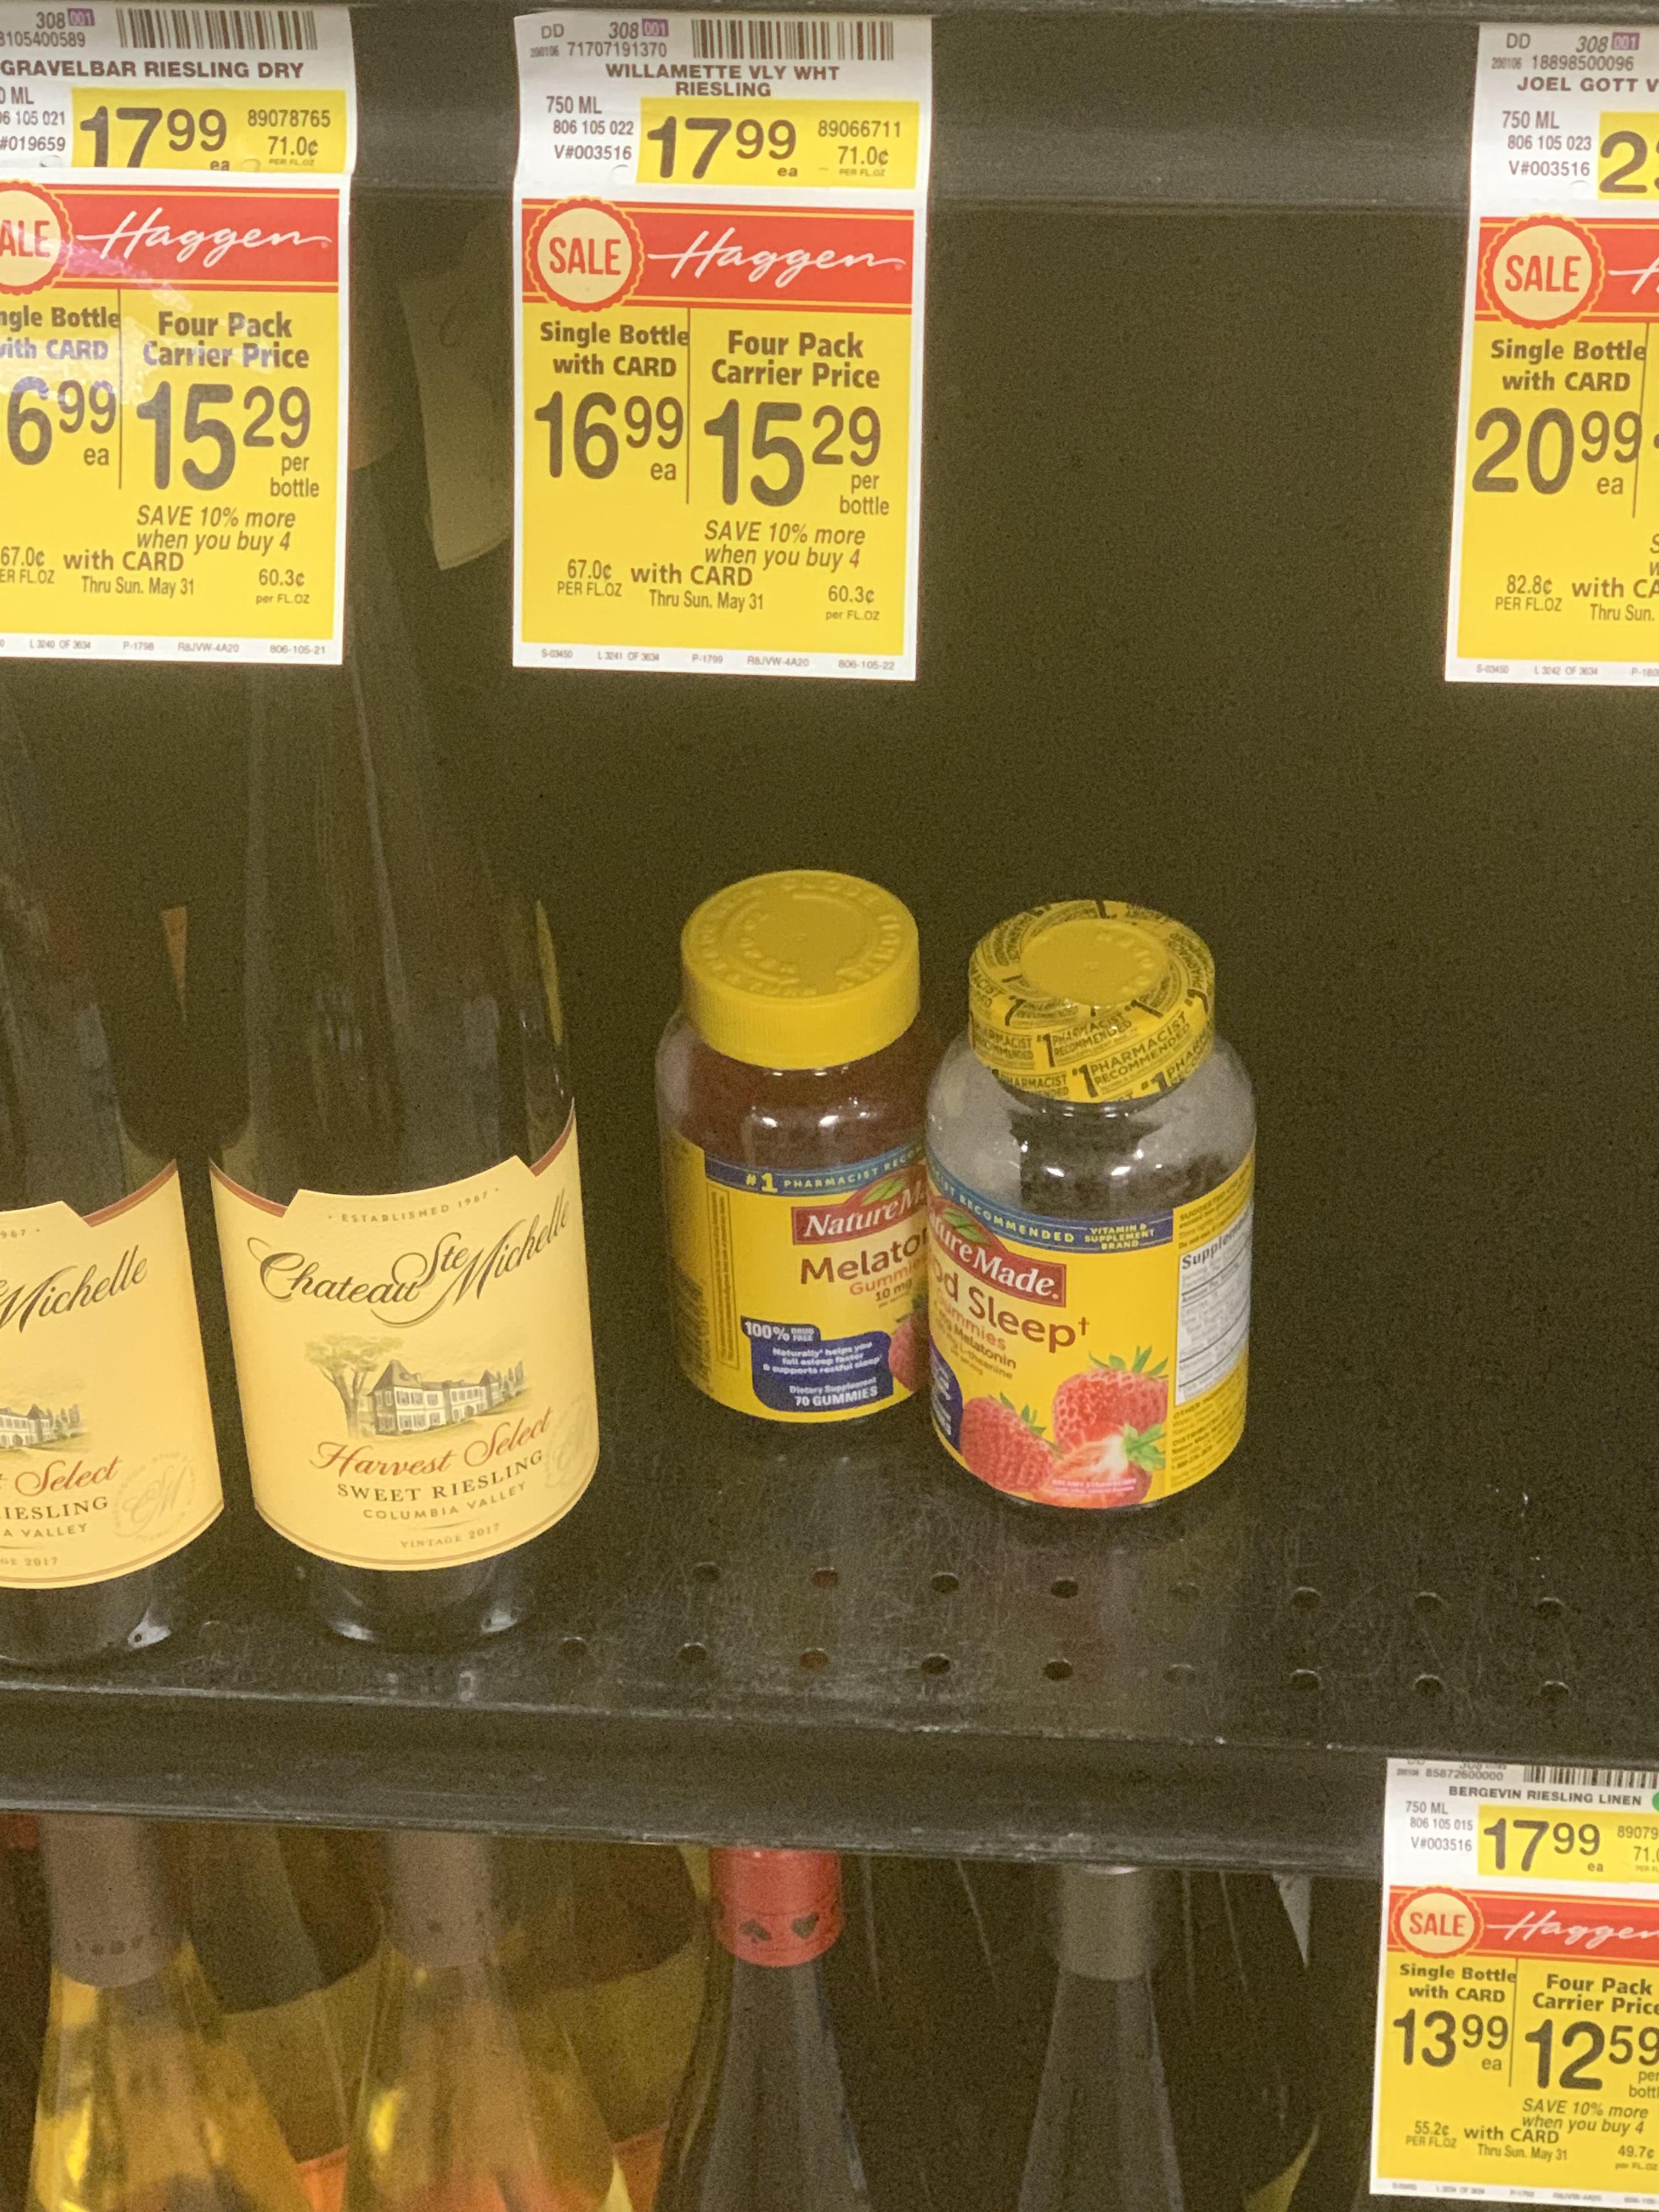 A decision was made here